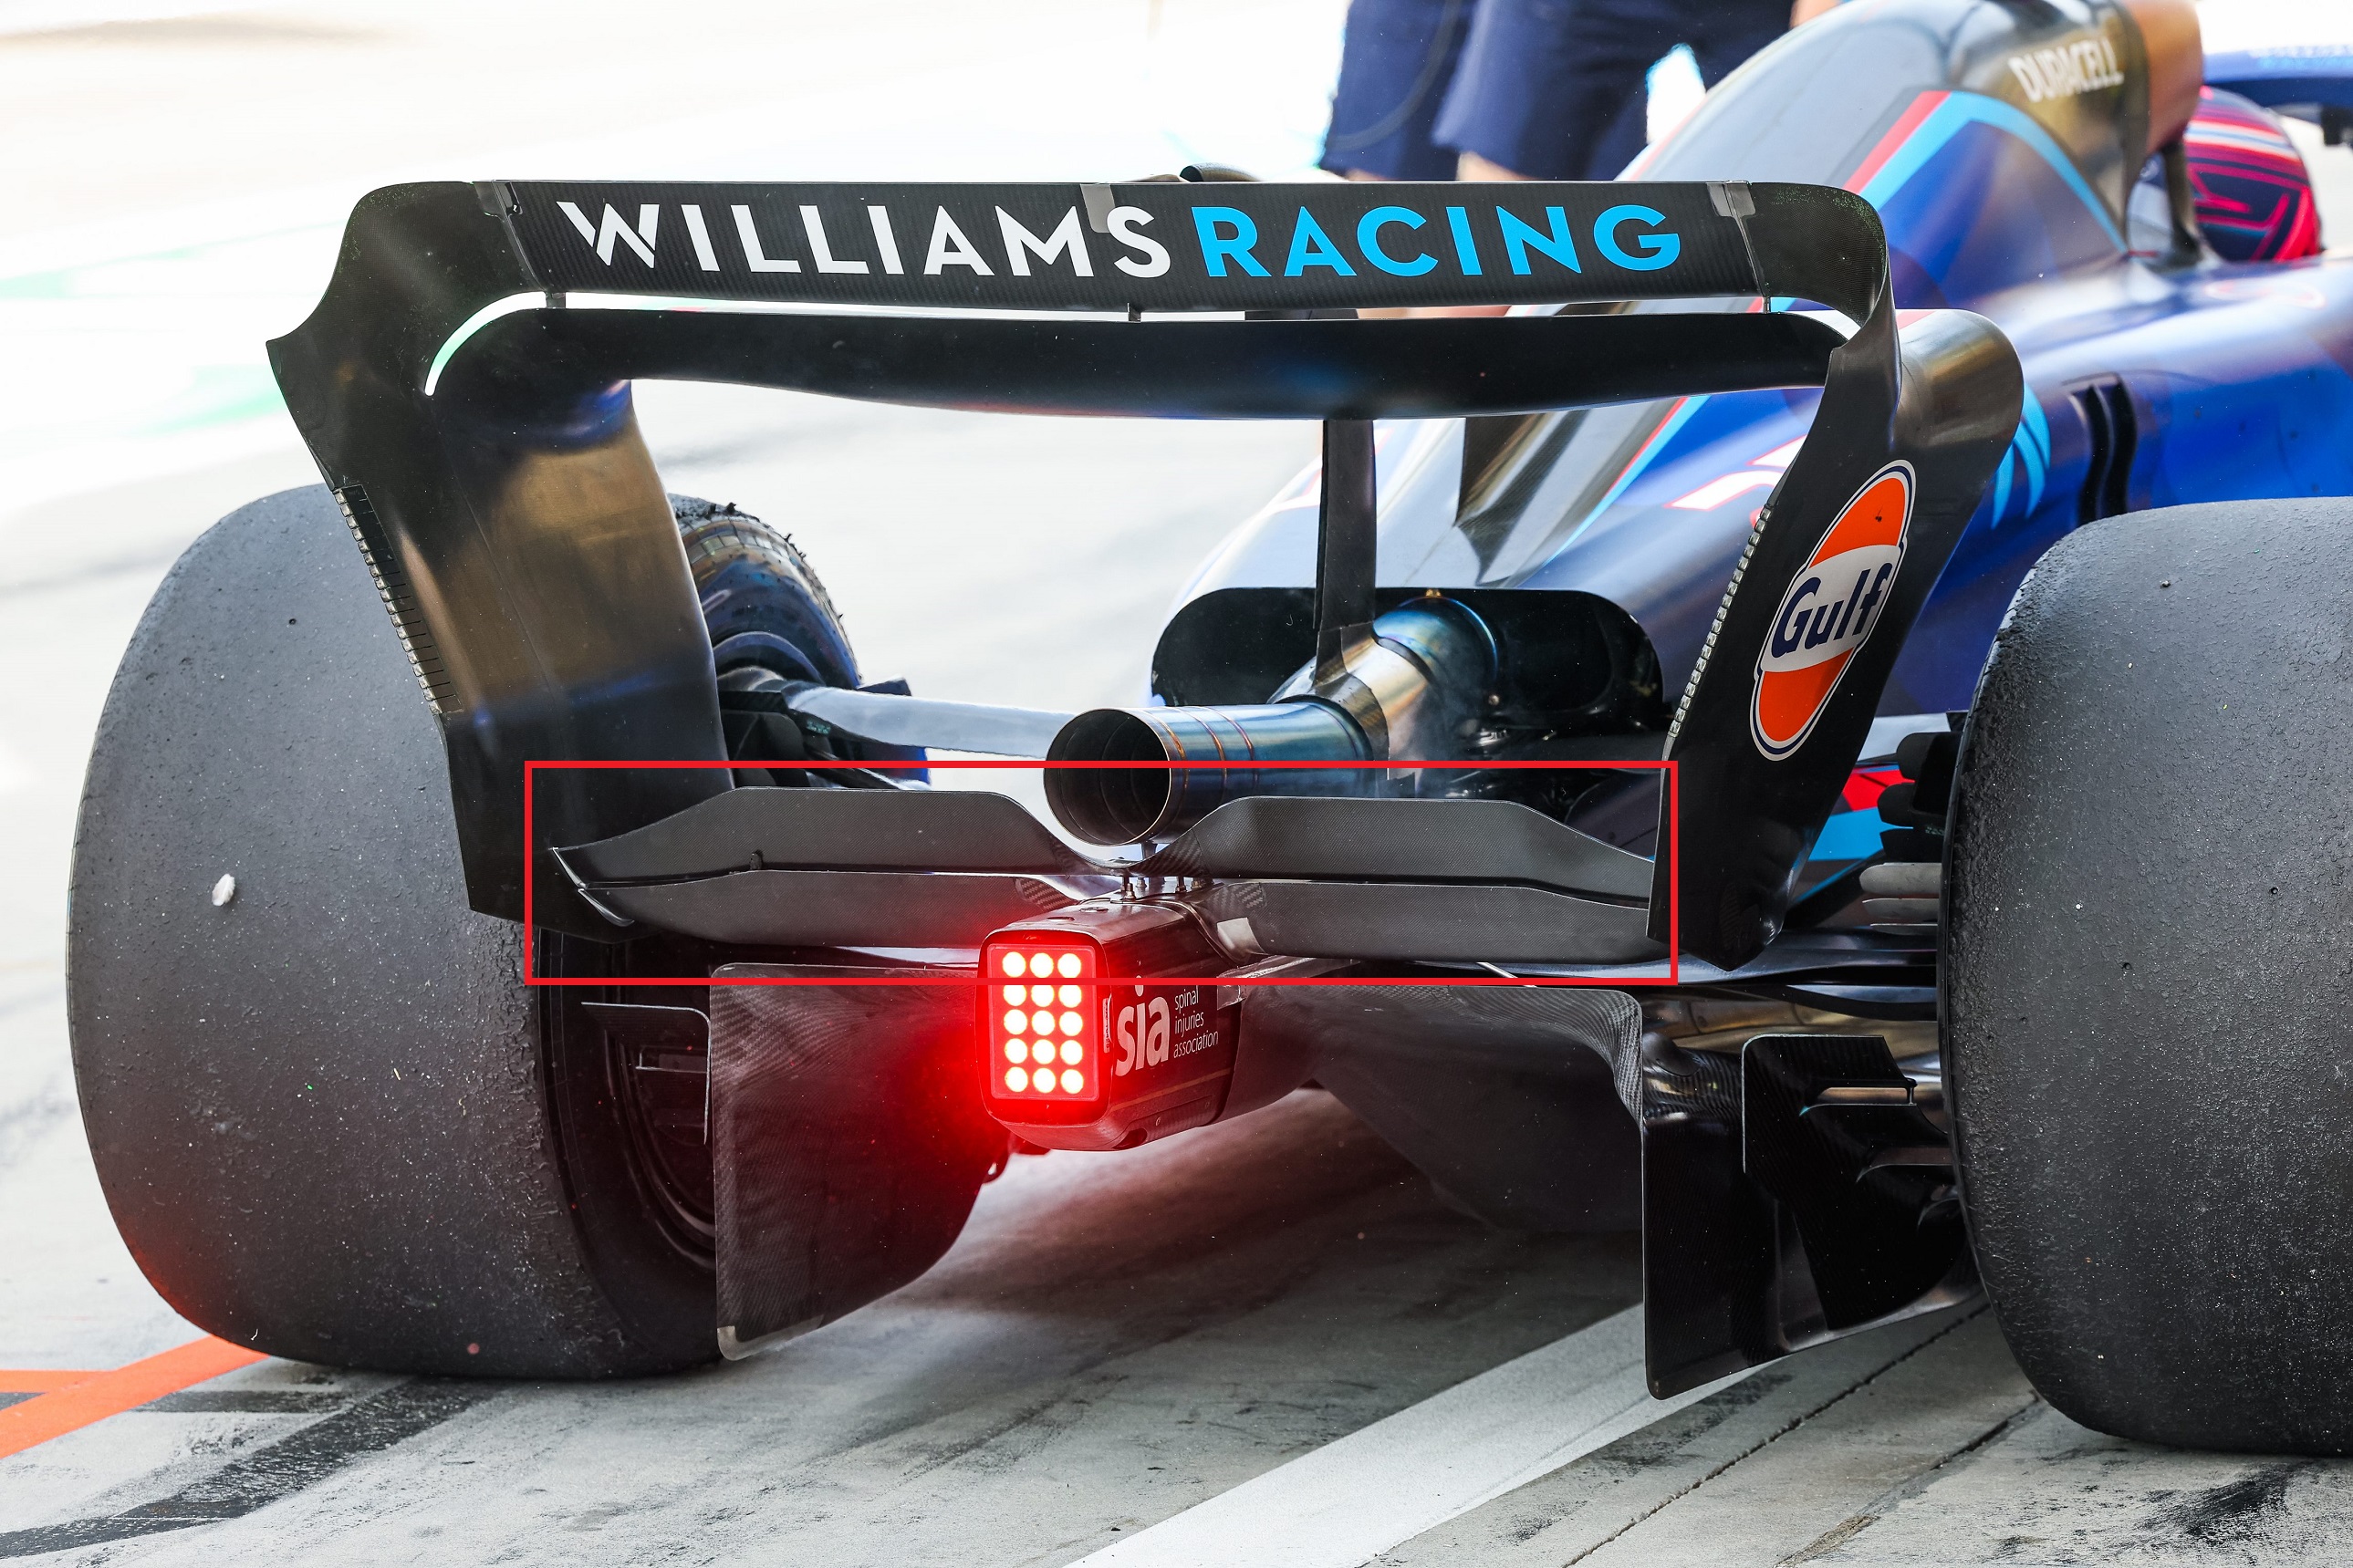 The 'beam wing' of the Williams car.